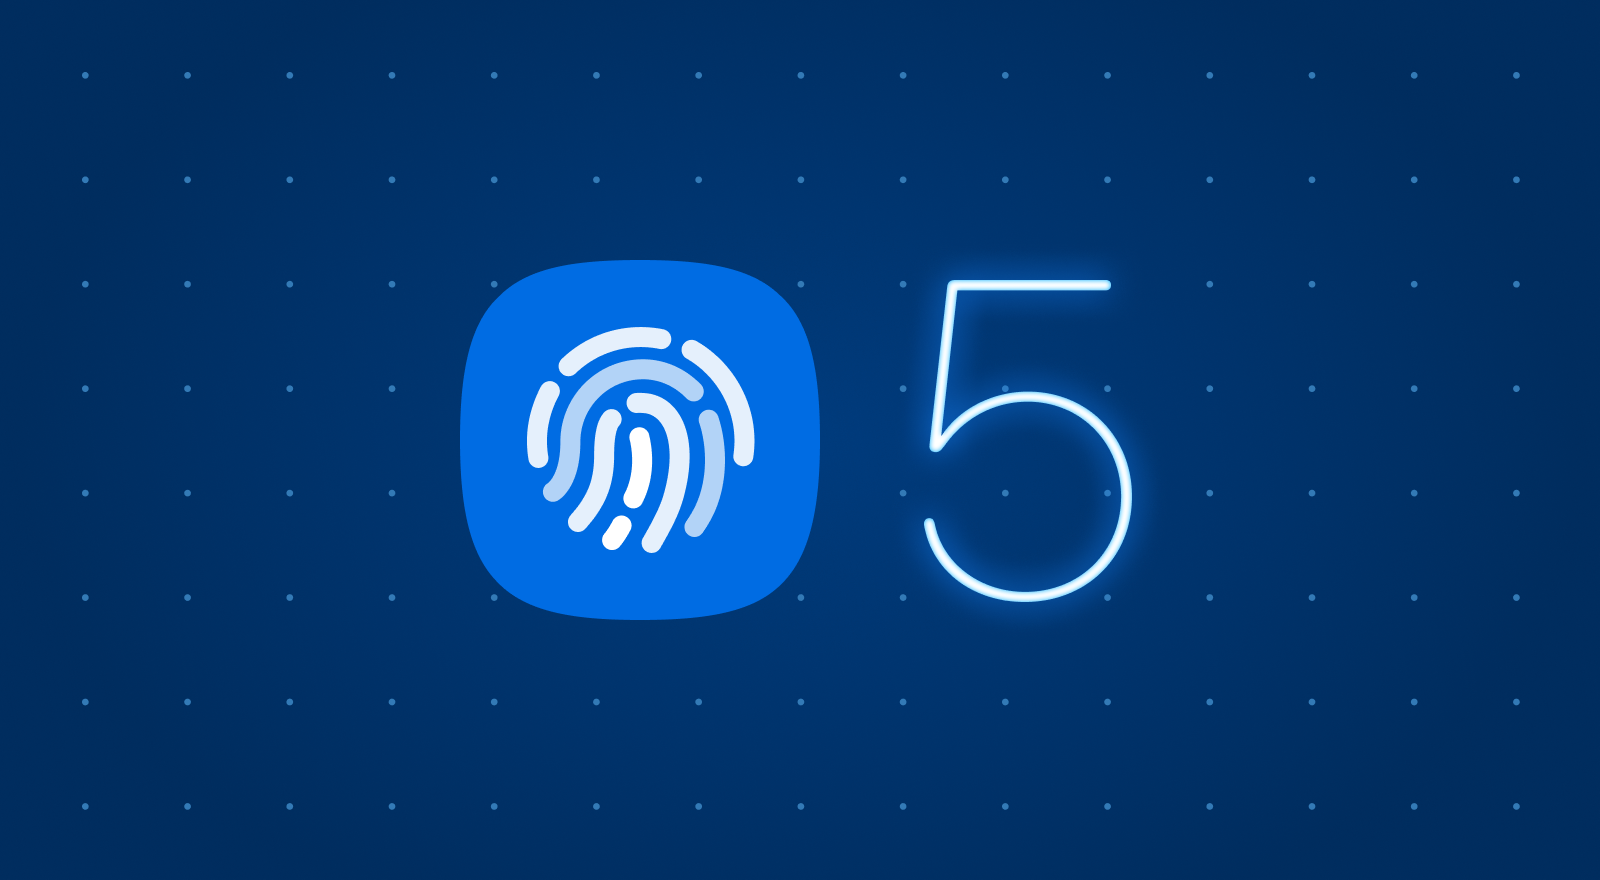 Ionic’s Advanced Biometric Security Solution: Identity Vault 5.0 - Blue thumbprint and blue 5 on dark blue dotted background